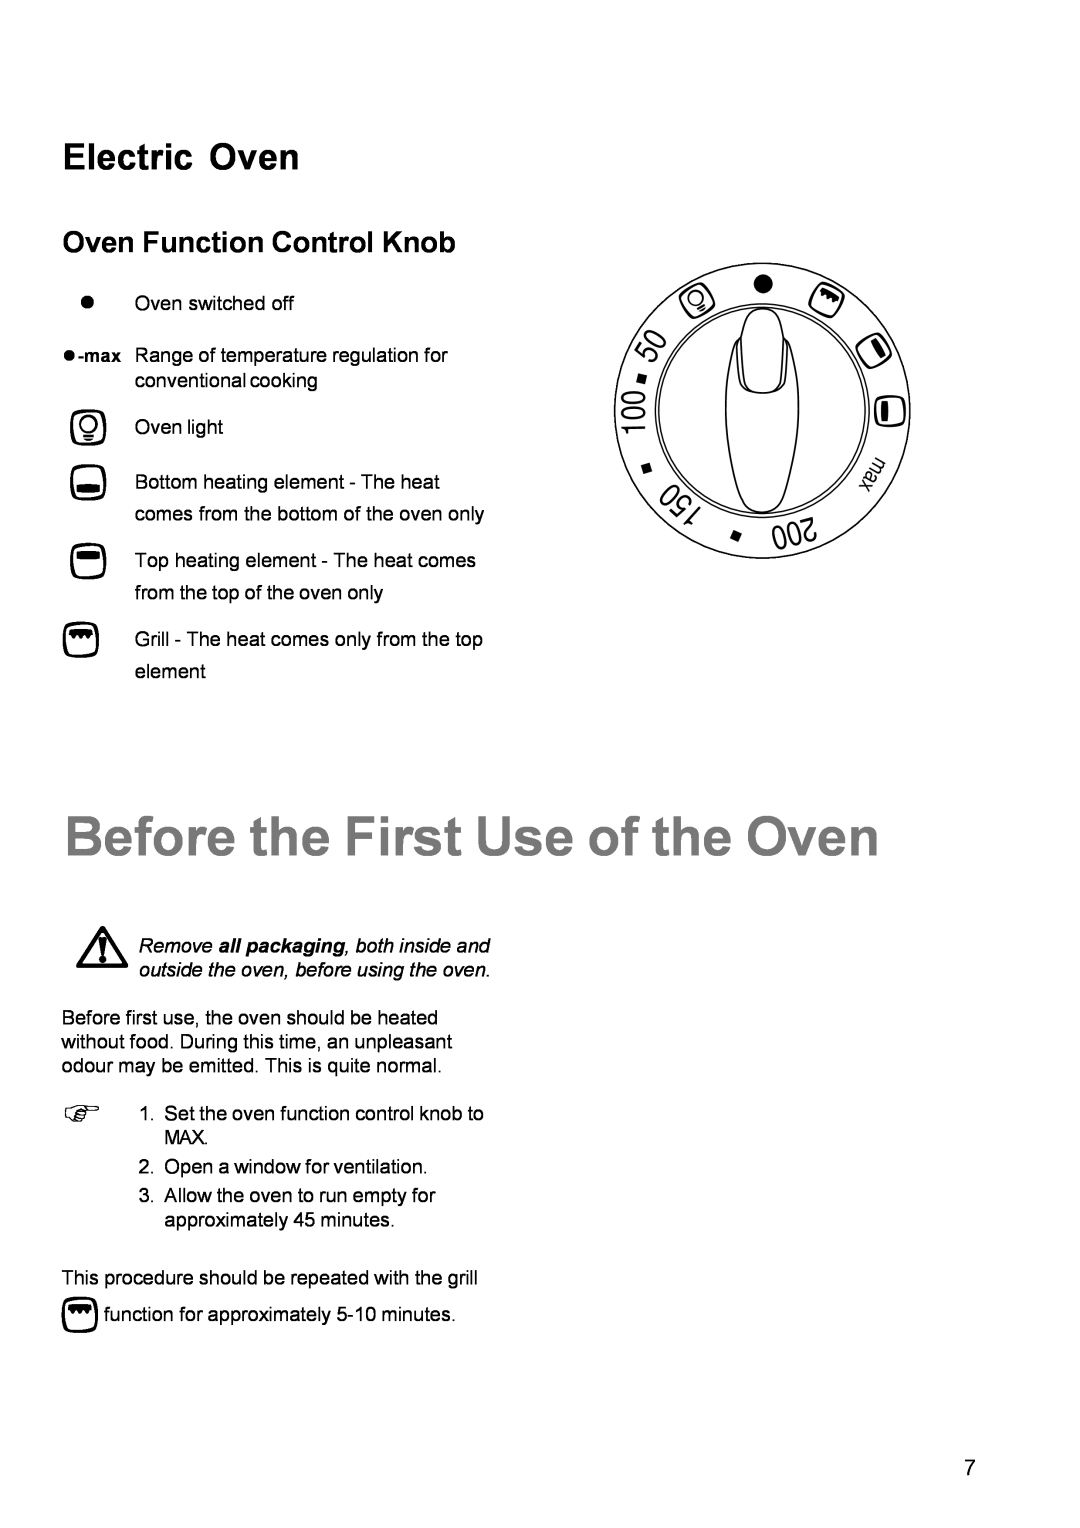 Electrolux EK 5741 manual Before the First Use of the Oven, Oven Function Control Knob, Electric Oven 